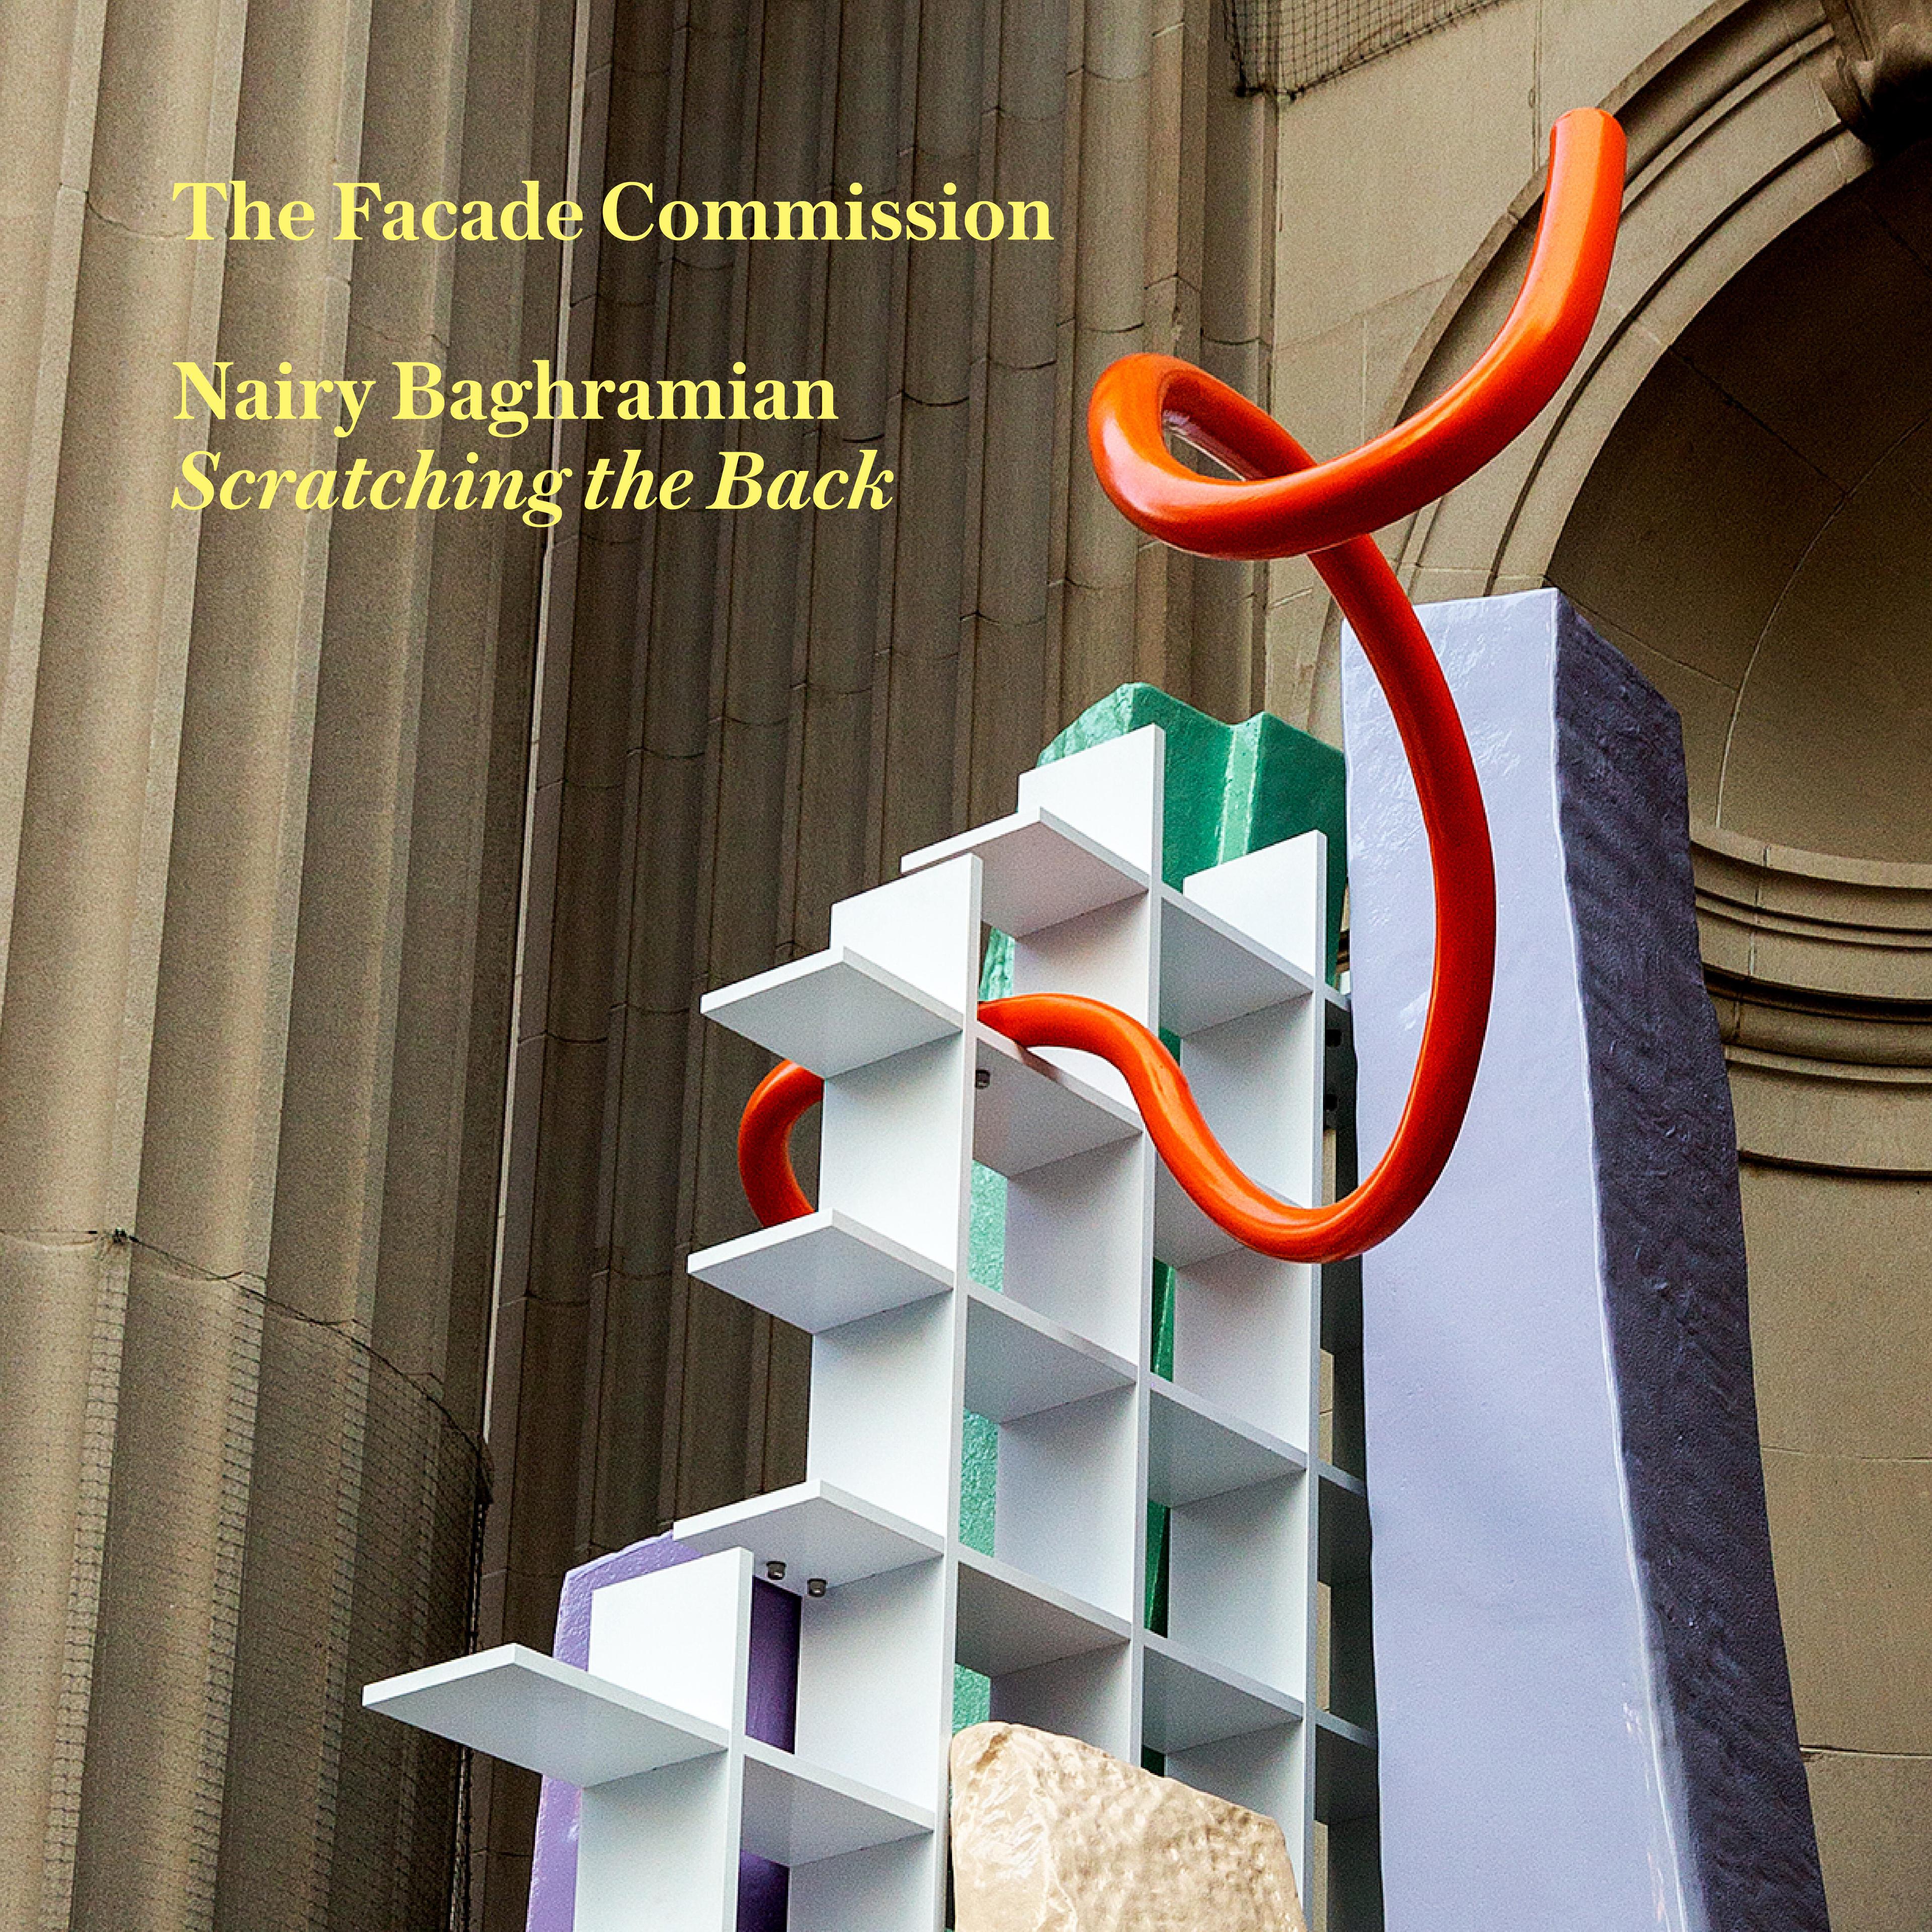 Nairy Baghramian exhibition structure built